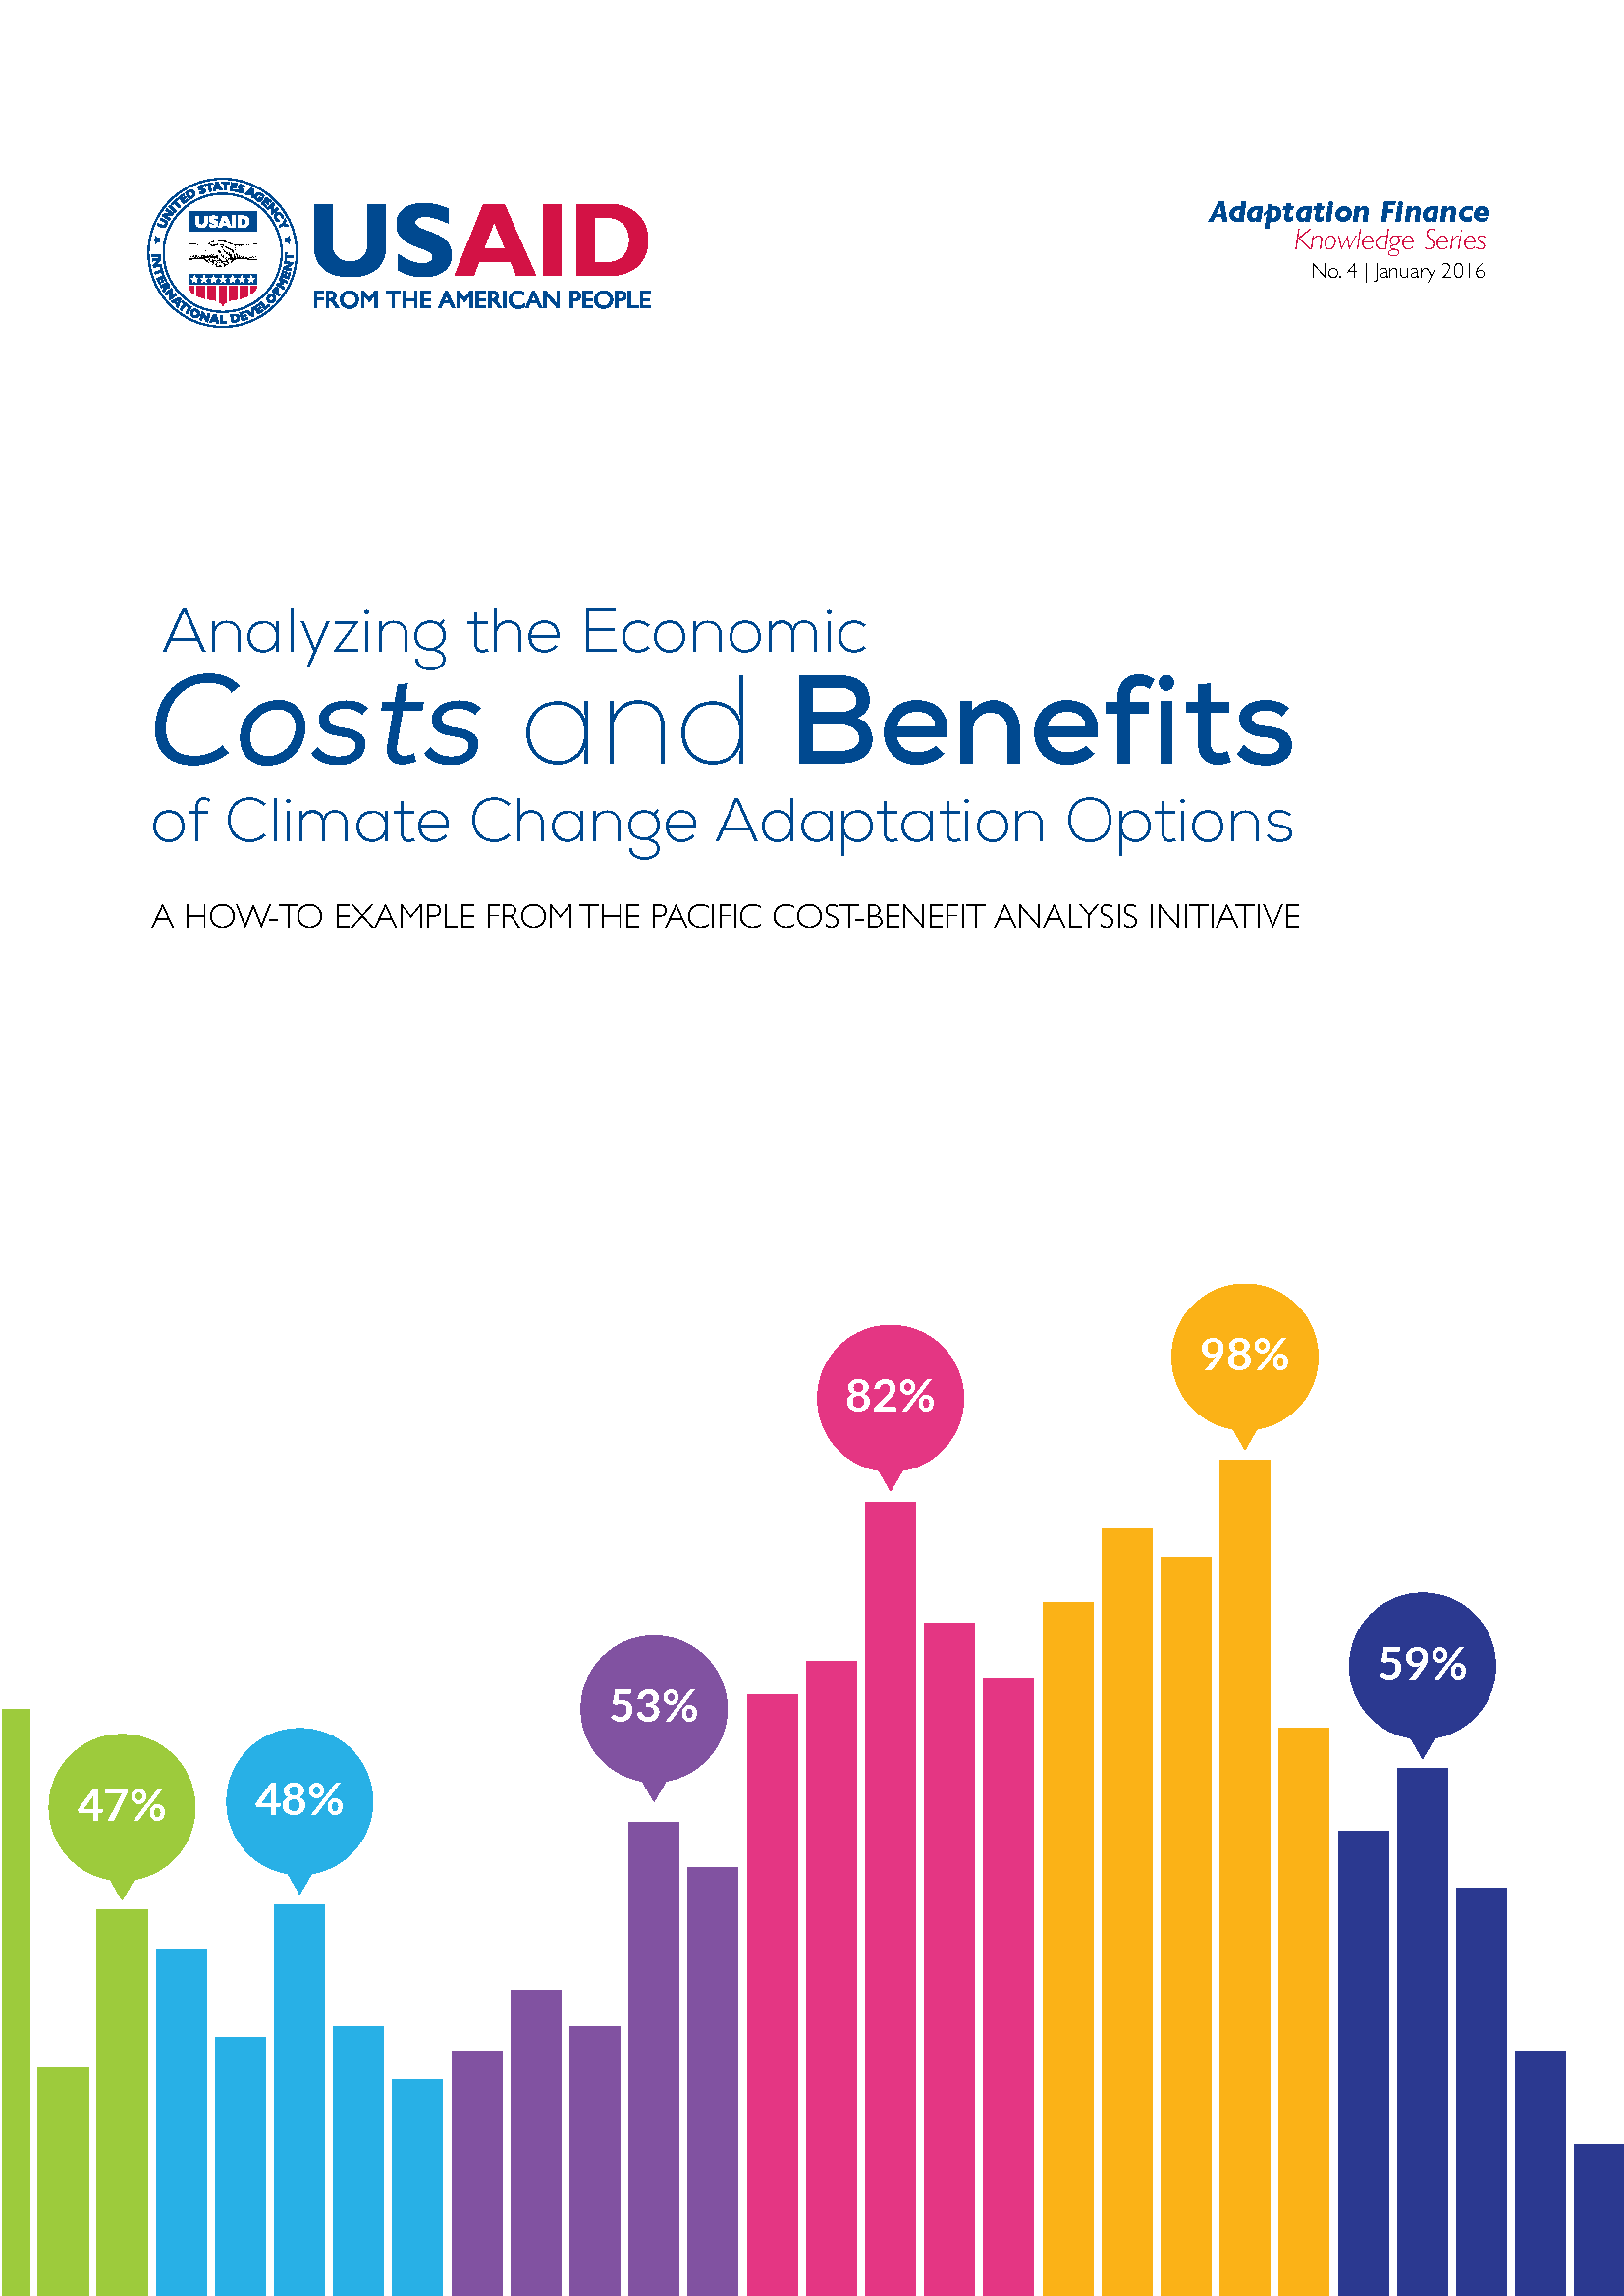 Analyzing the Economic Costs and Benefits of CCA Options